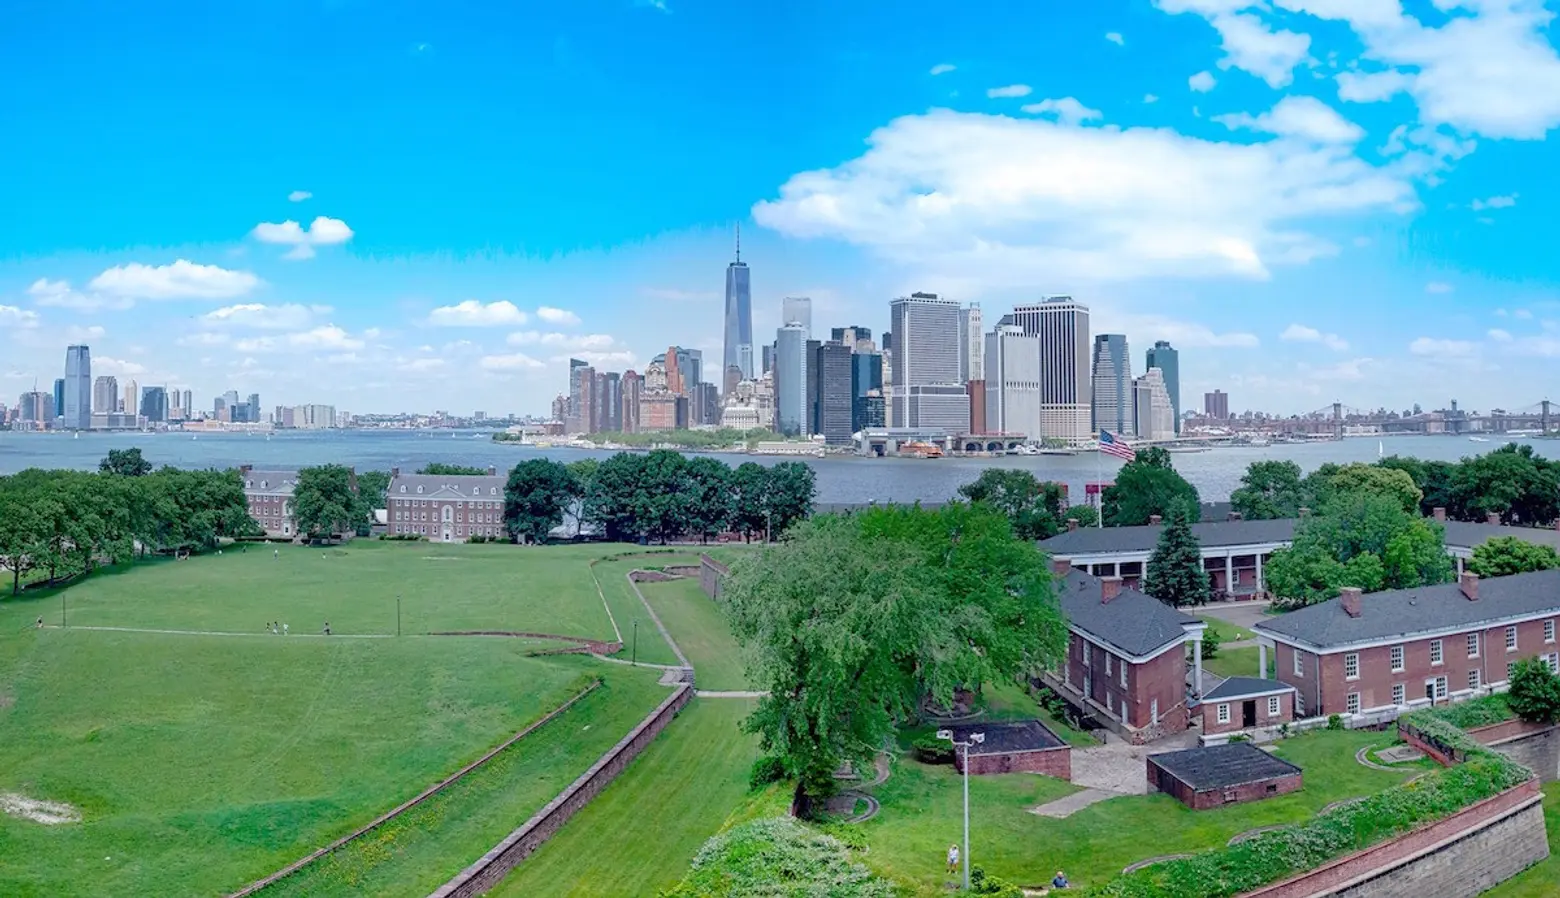 Governors Island to open a month early on May 1st with new oyster garden